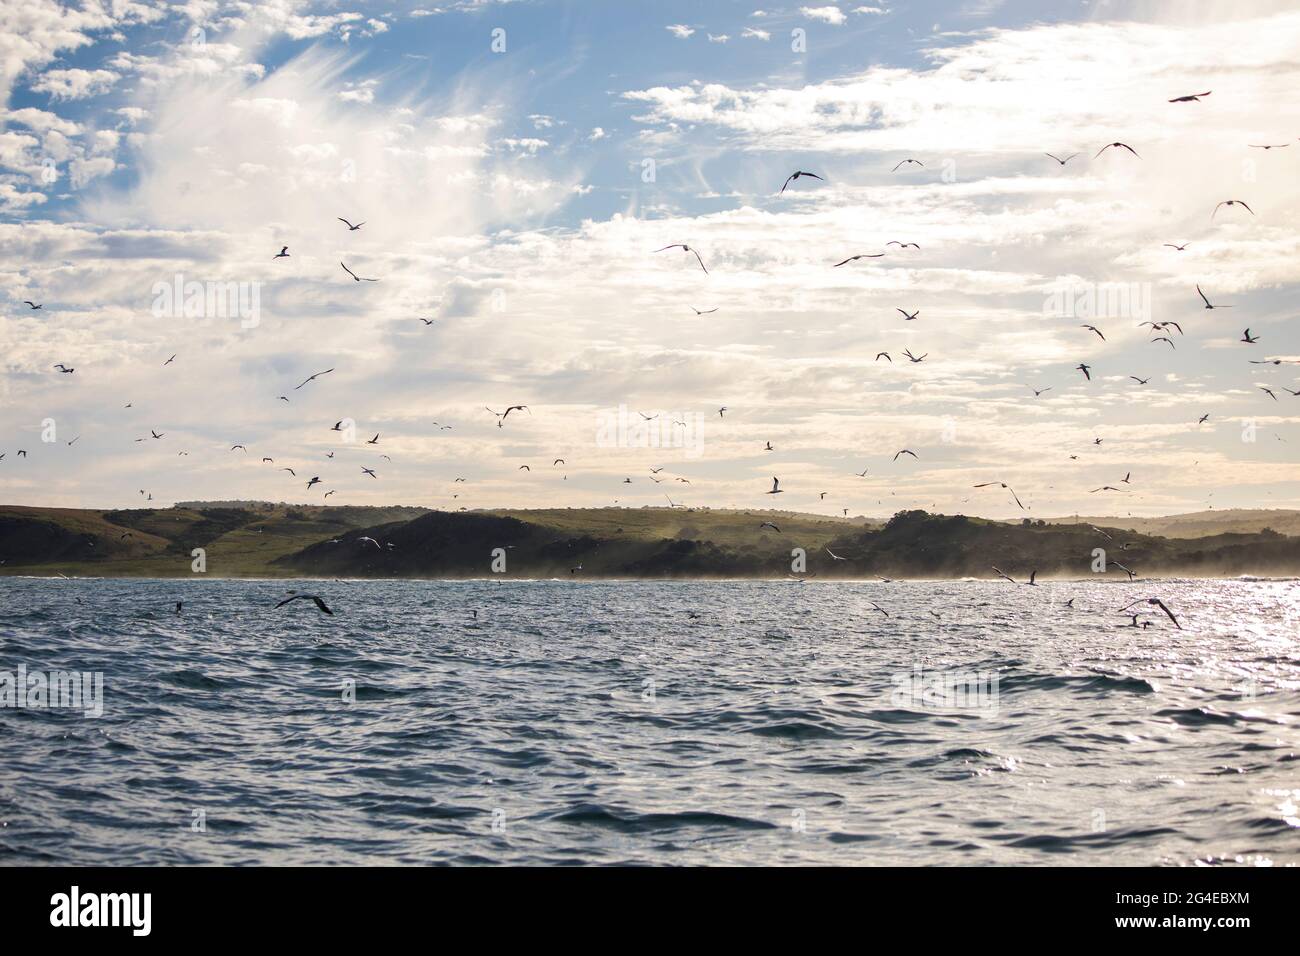 Seascape with a cloudy sky and Cape gannets (Morus capensis) circling in the air over a bait ball Stock Photo